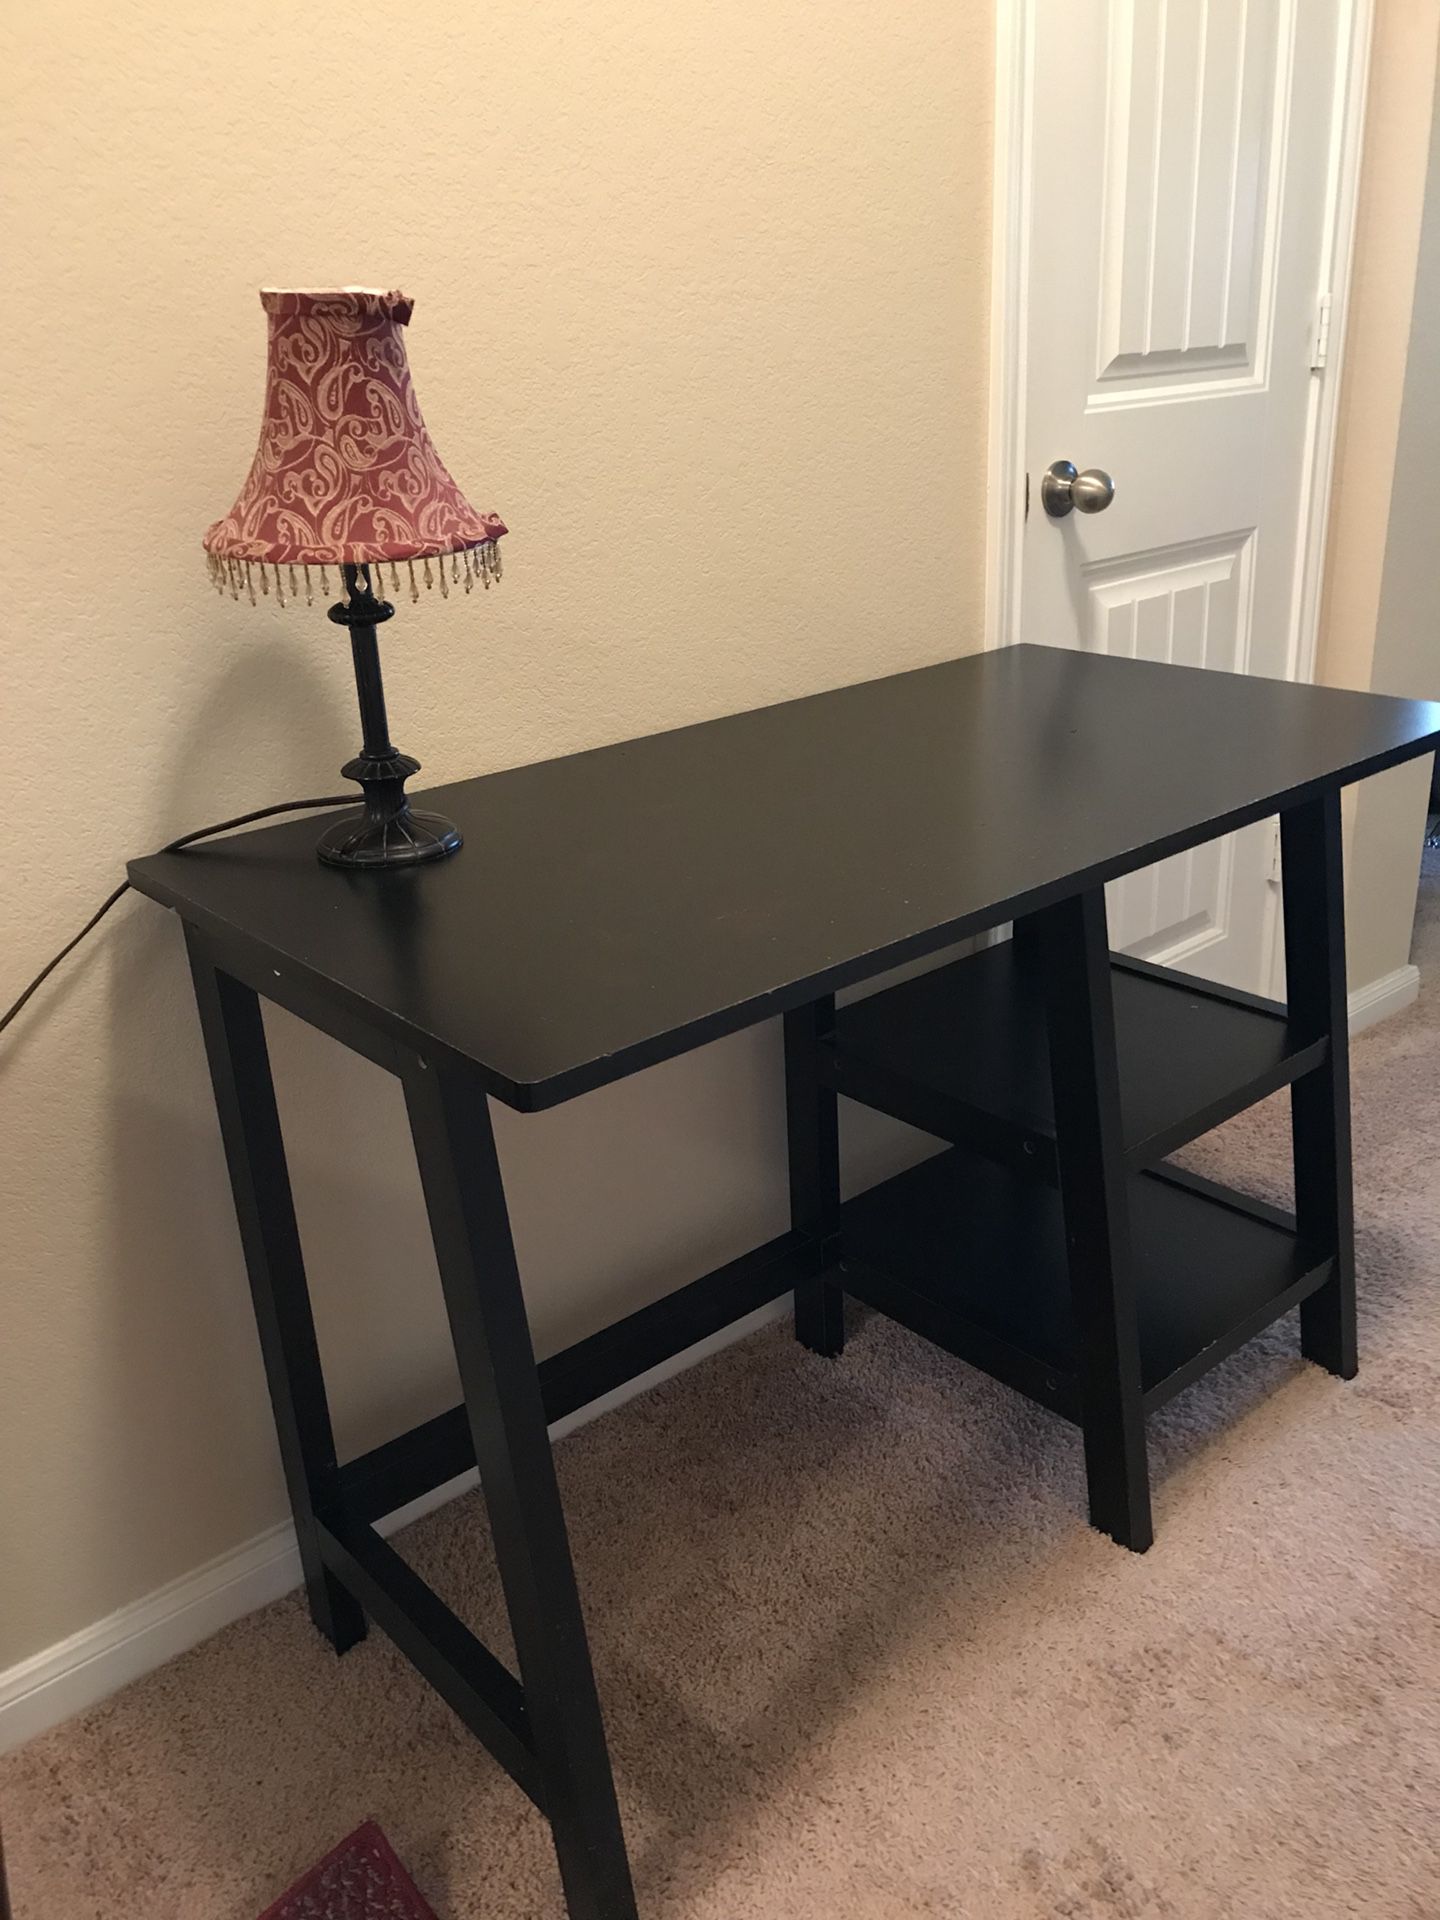 This desk was purchase with other furniture items so its not that cheap kind of a desk. Its still very sturdy and was gently used, so it does has som